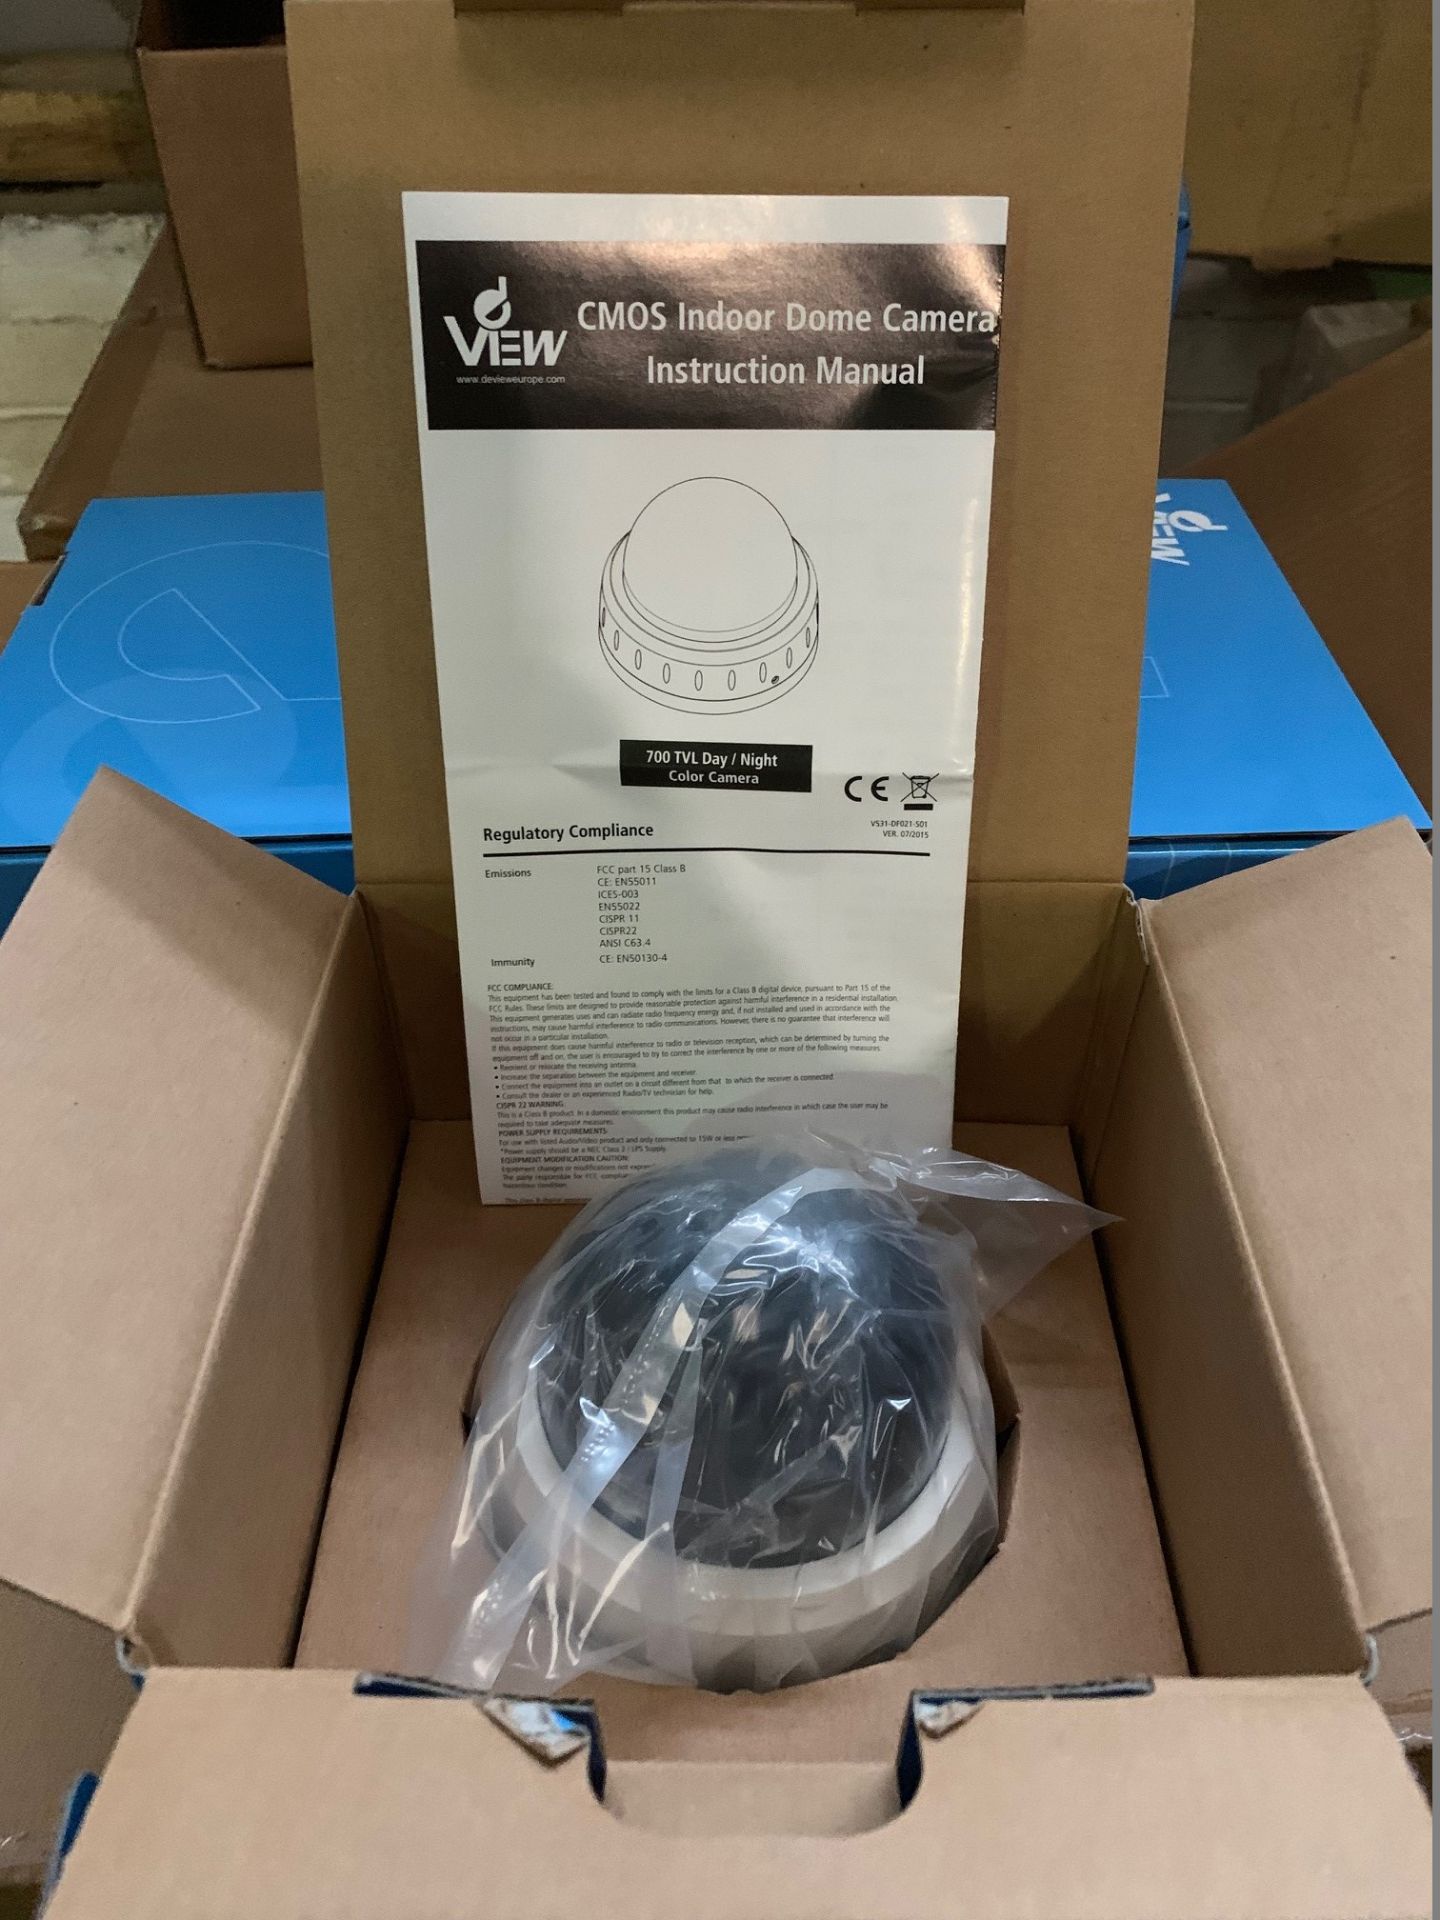 4 x dView CMOS Indoor Dome Cameras - 700TVL, SDN, PAL, 3.6mm - Model MD3SPC736T (Brand New & Boxed)